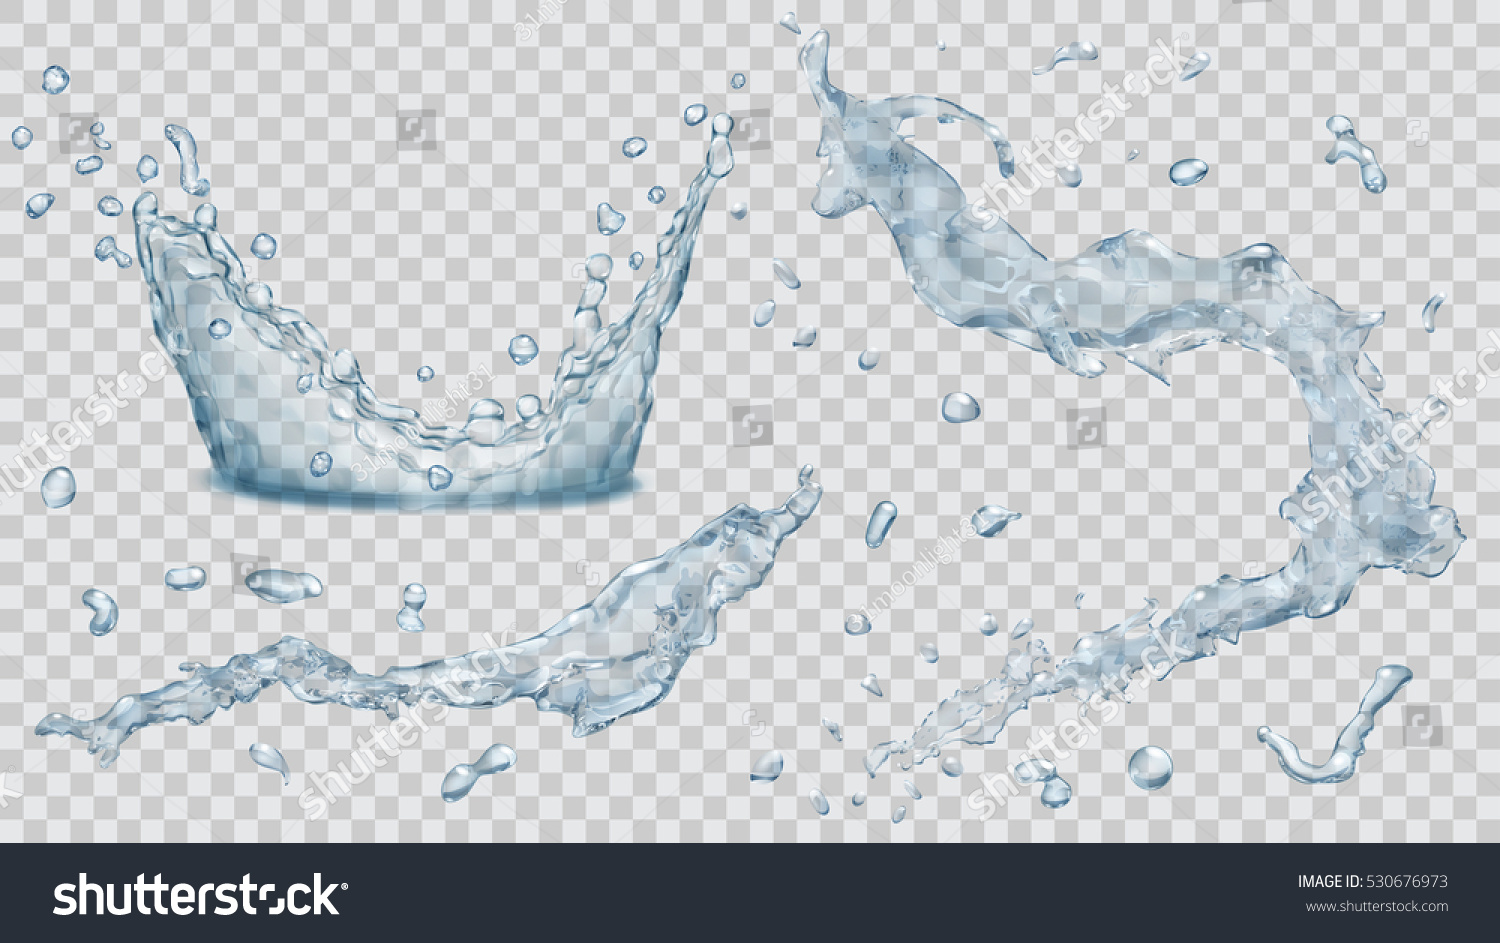 Set of translucent water splashes, drops and crown in light blue colors, isolated on transparent background. Transparency only in vector file.